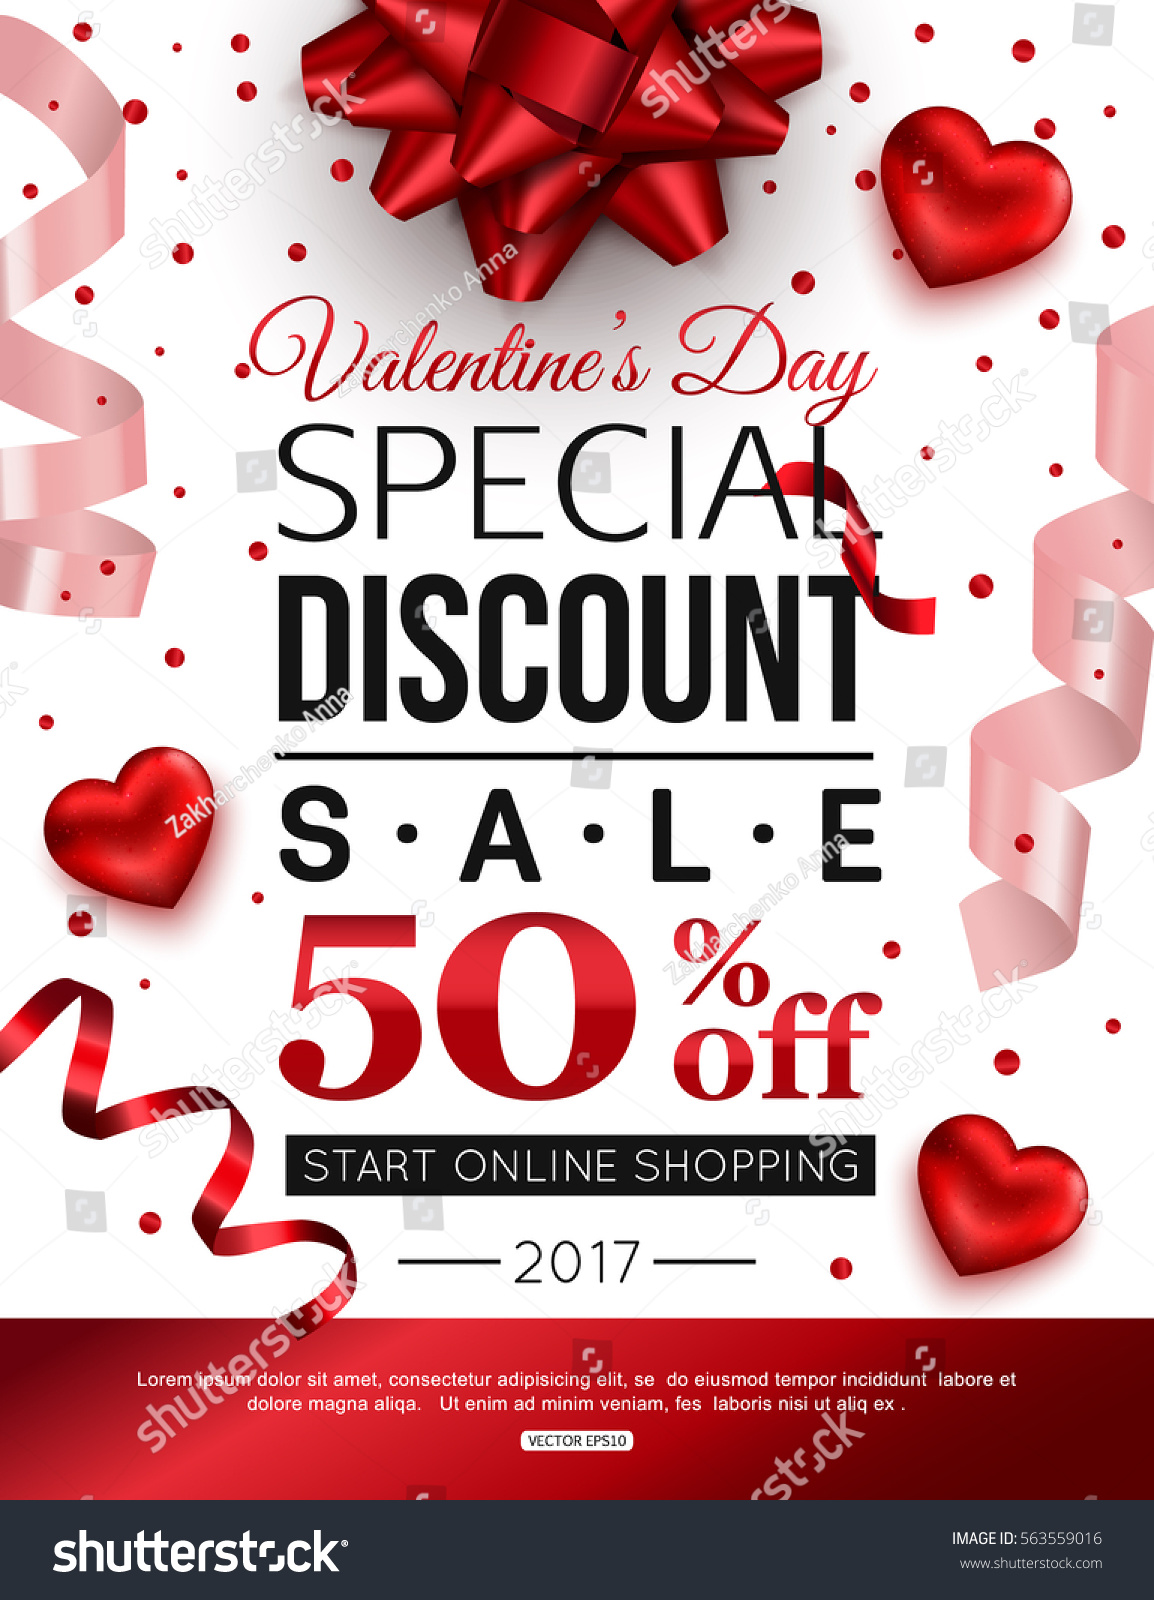 Stream Pornhub Valentines Day Special : Valentine's Day Restaurant Deals Roundup - NorCal Coupon Gal